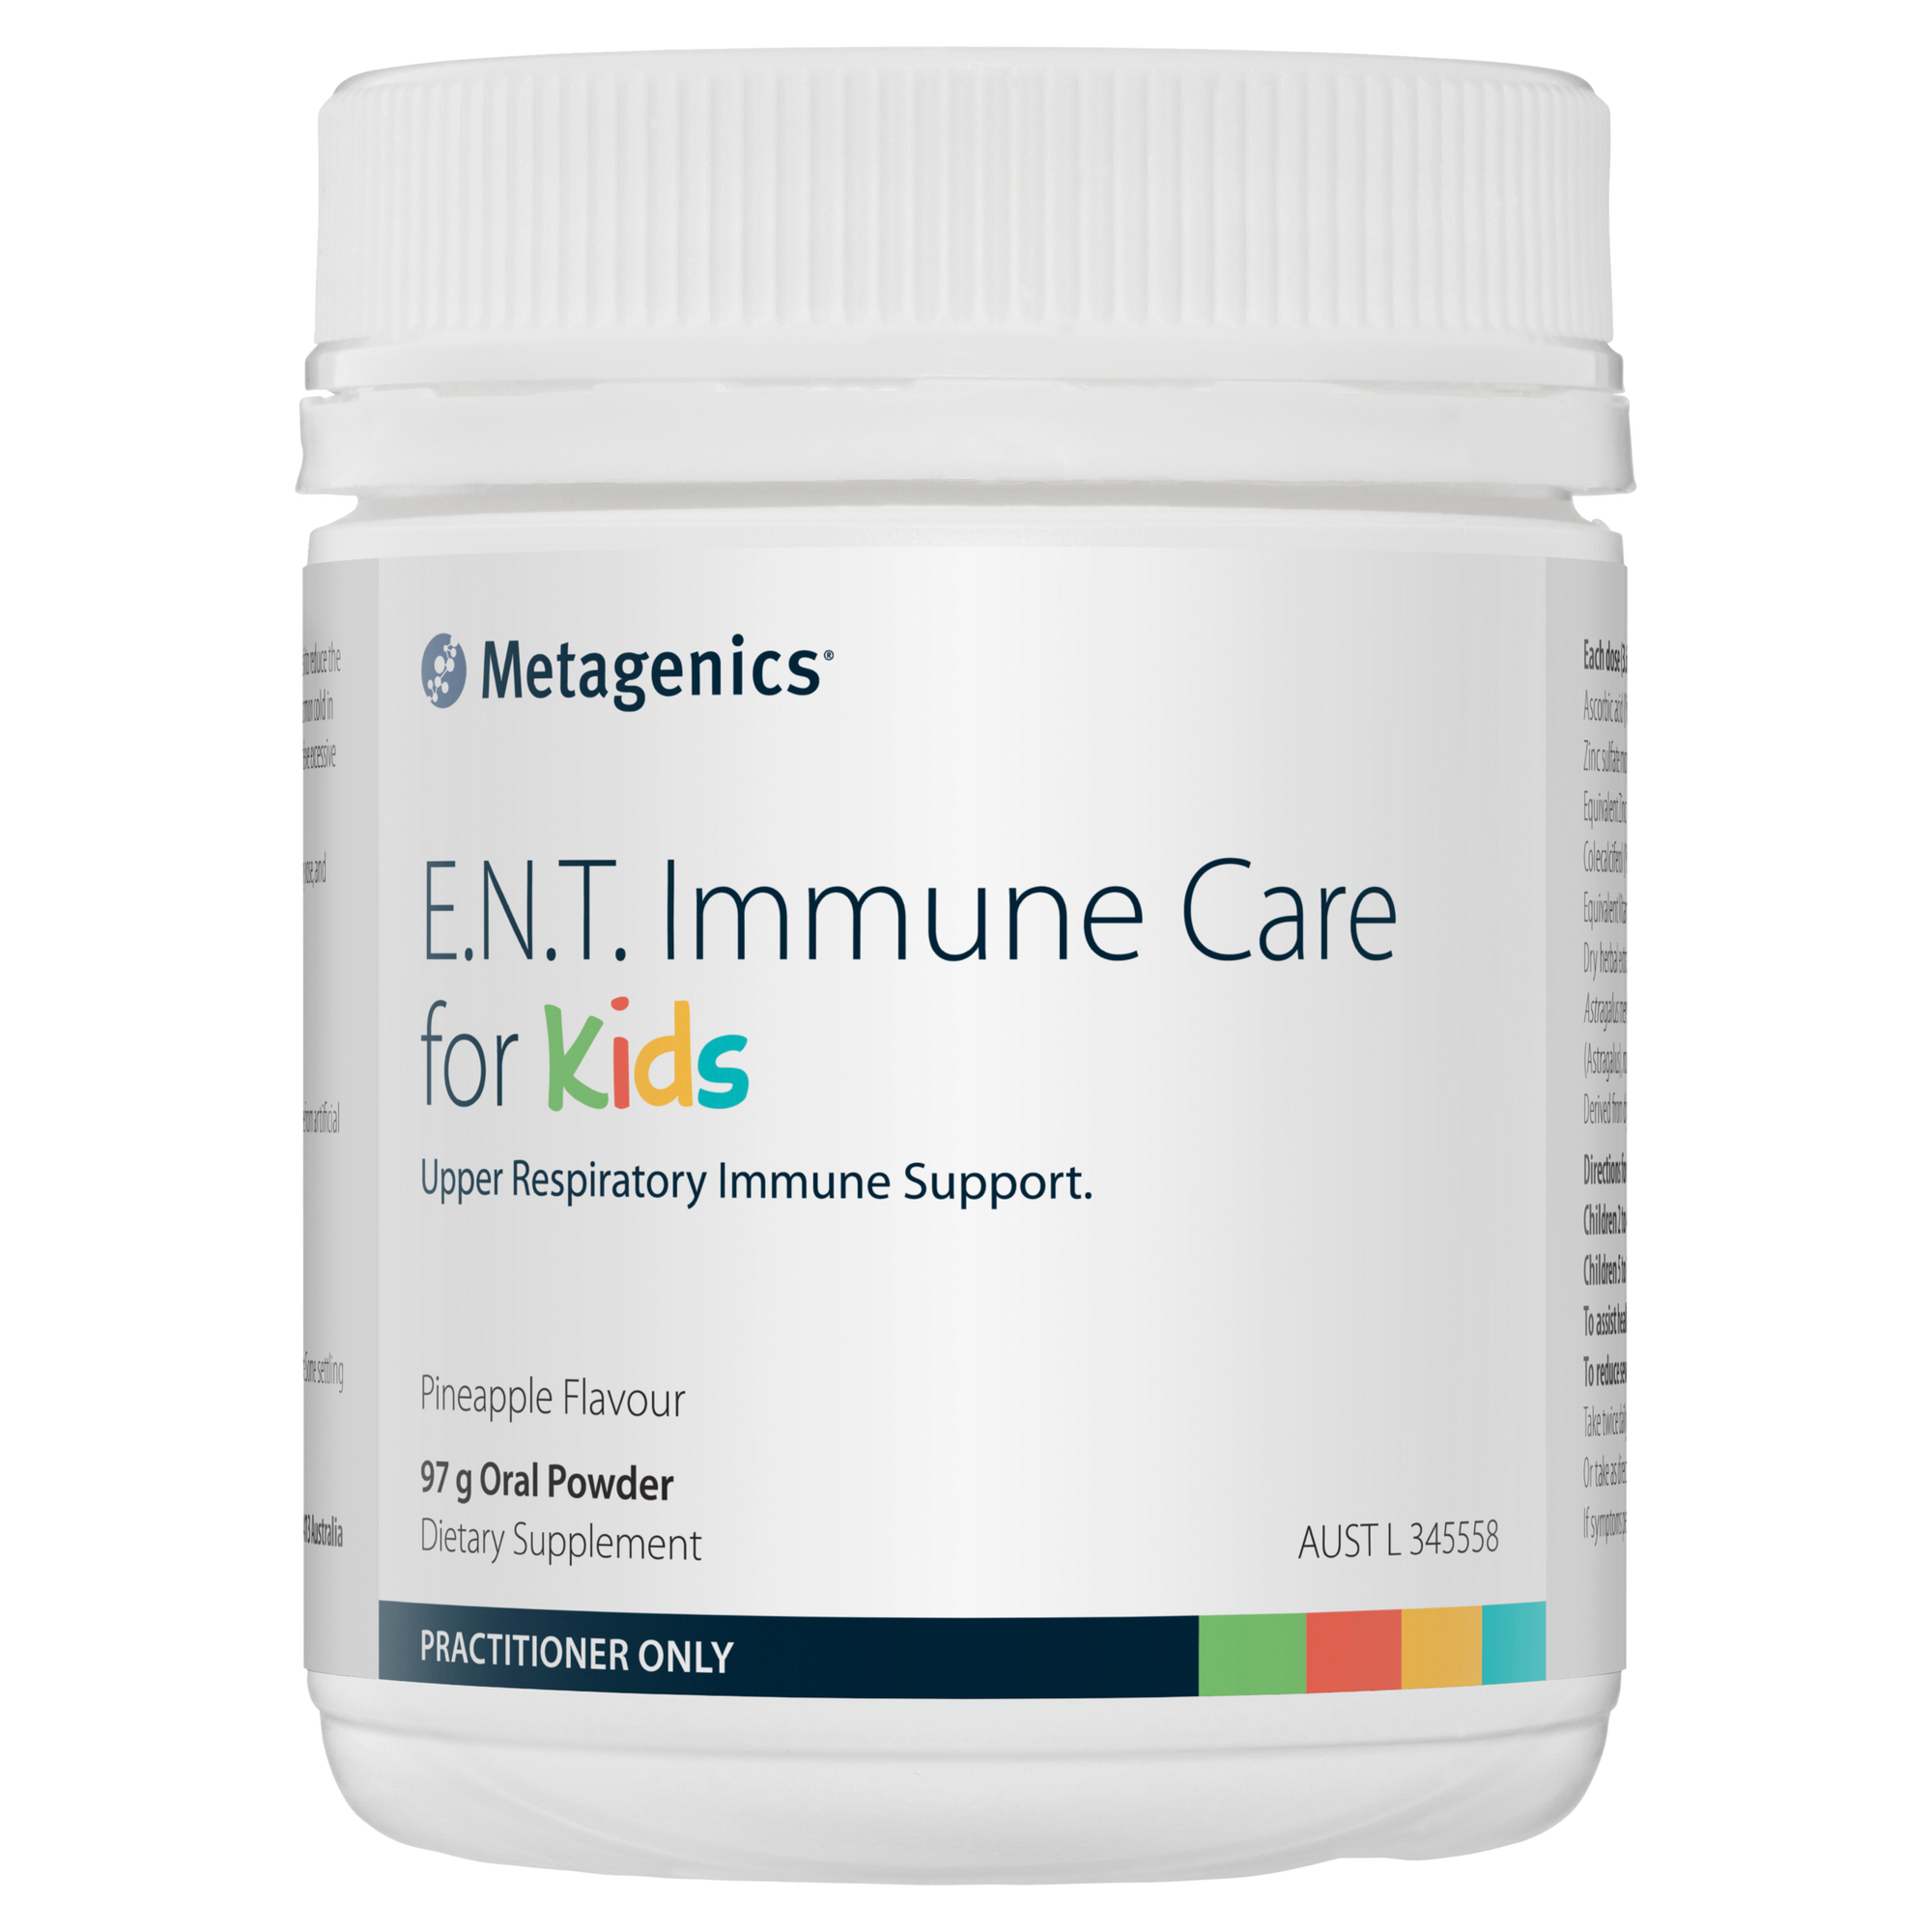 Metagenics E.N.T. Immune Care for Kids Oral Powder Pineapple Flavour 97gm